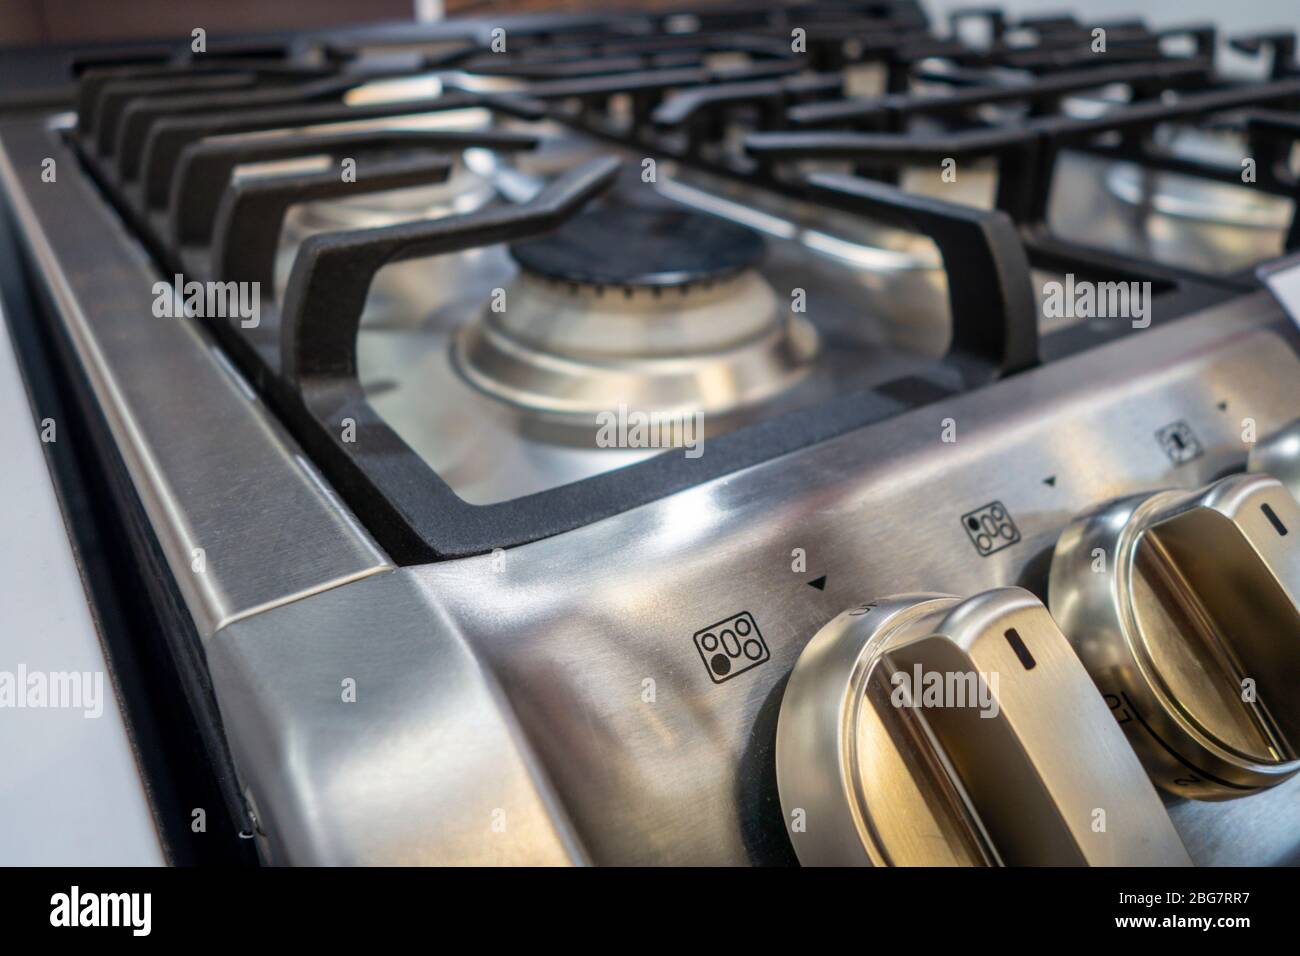 residential kitchen burner and range dials close up Stock Photo